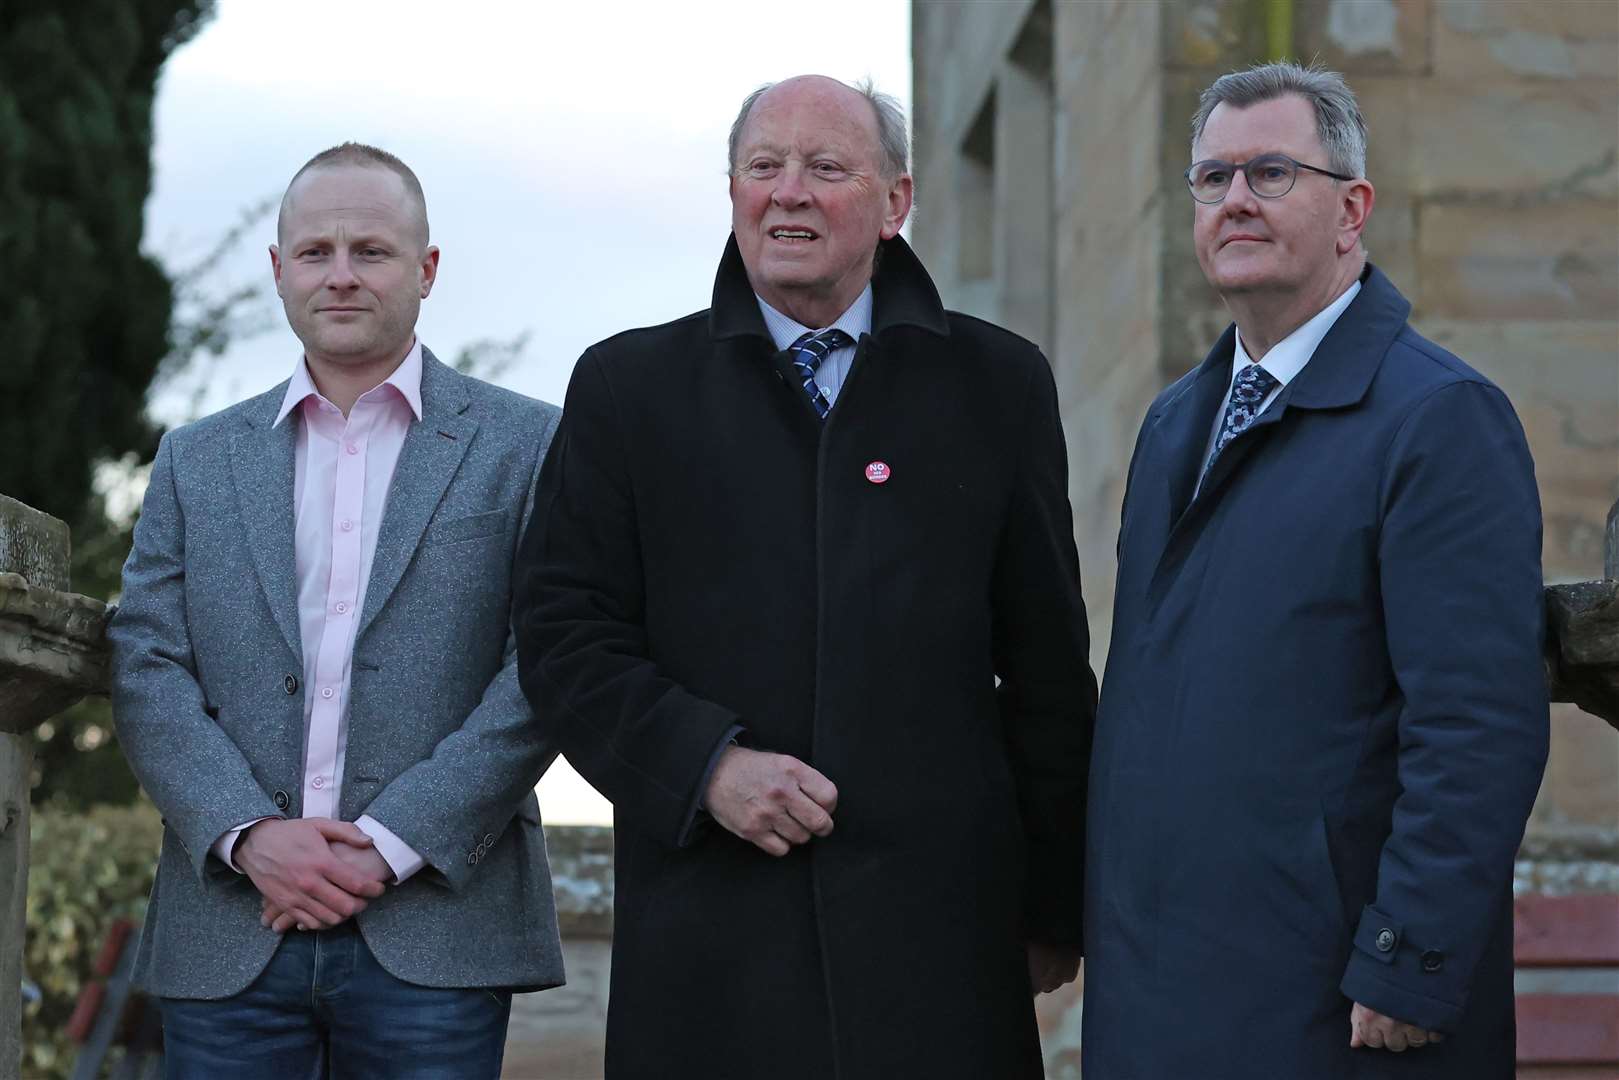 (l to r) Jamie Bryson, Jim Allister and DUP leader Sir Jeffrey Donaldson attend a rally in opposition to the Northern Ireland Protocol in Lurgan, County Armagh in 2022 (Liam McBurney/PA)